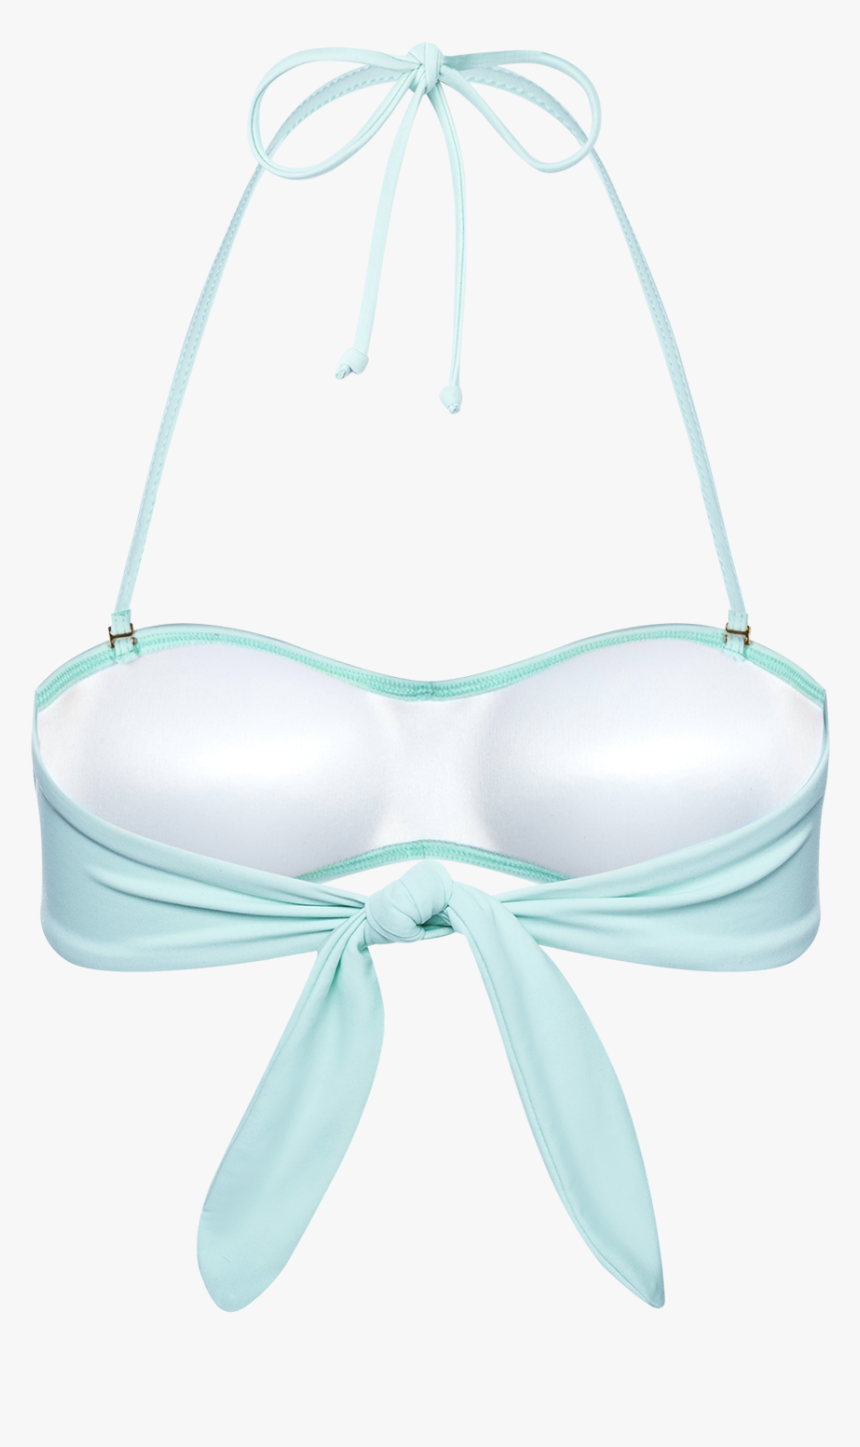 Swimsuit Bra Product Image - Swimsuit Top, HD Png Download, Free Download